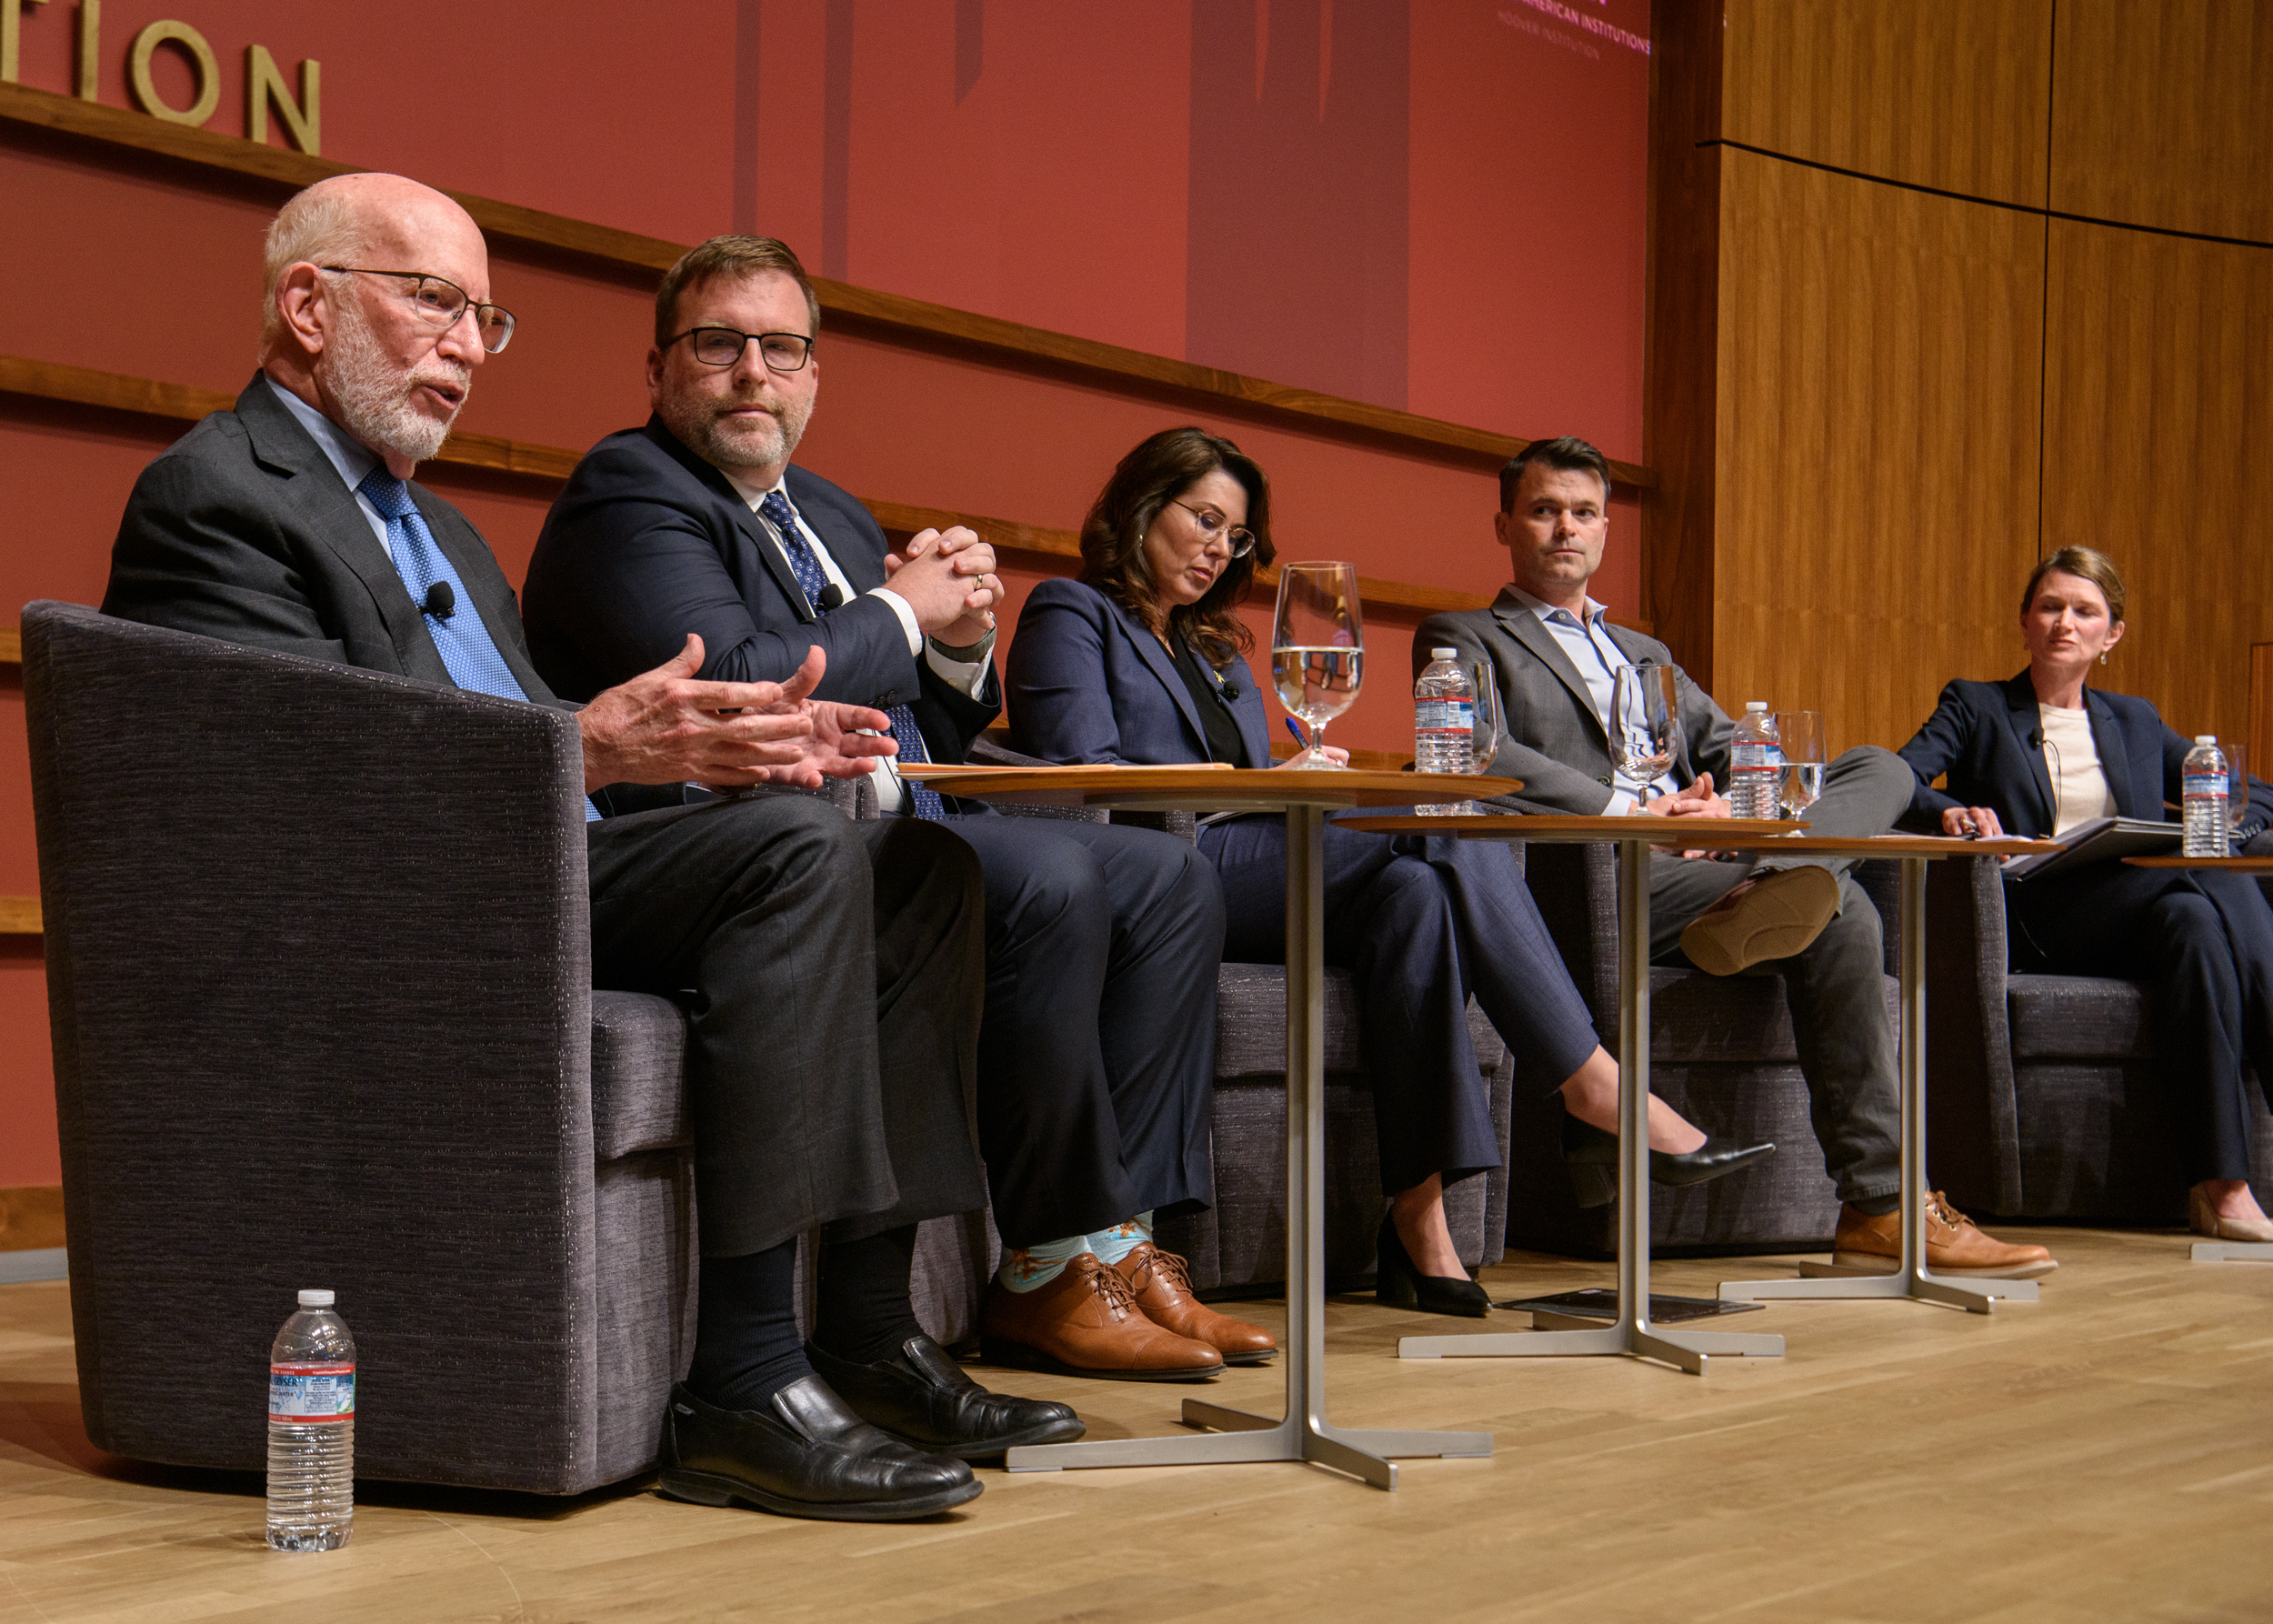 A panel convened on administration and trust in elections. Left to right: Benjamin Ginsberg, Justin Grimmer, Deidre Henderson, Rob Willer, and Sarah Anzia. (Patrick Beaudouin, 2023)